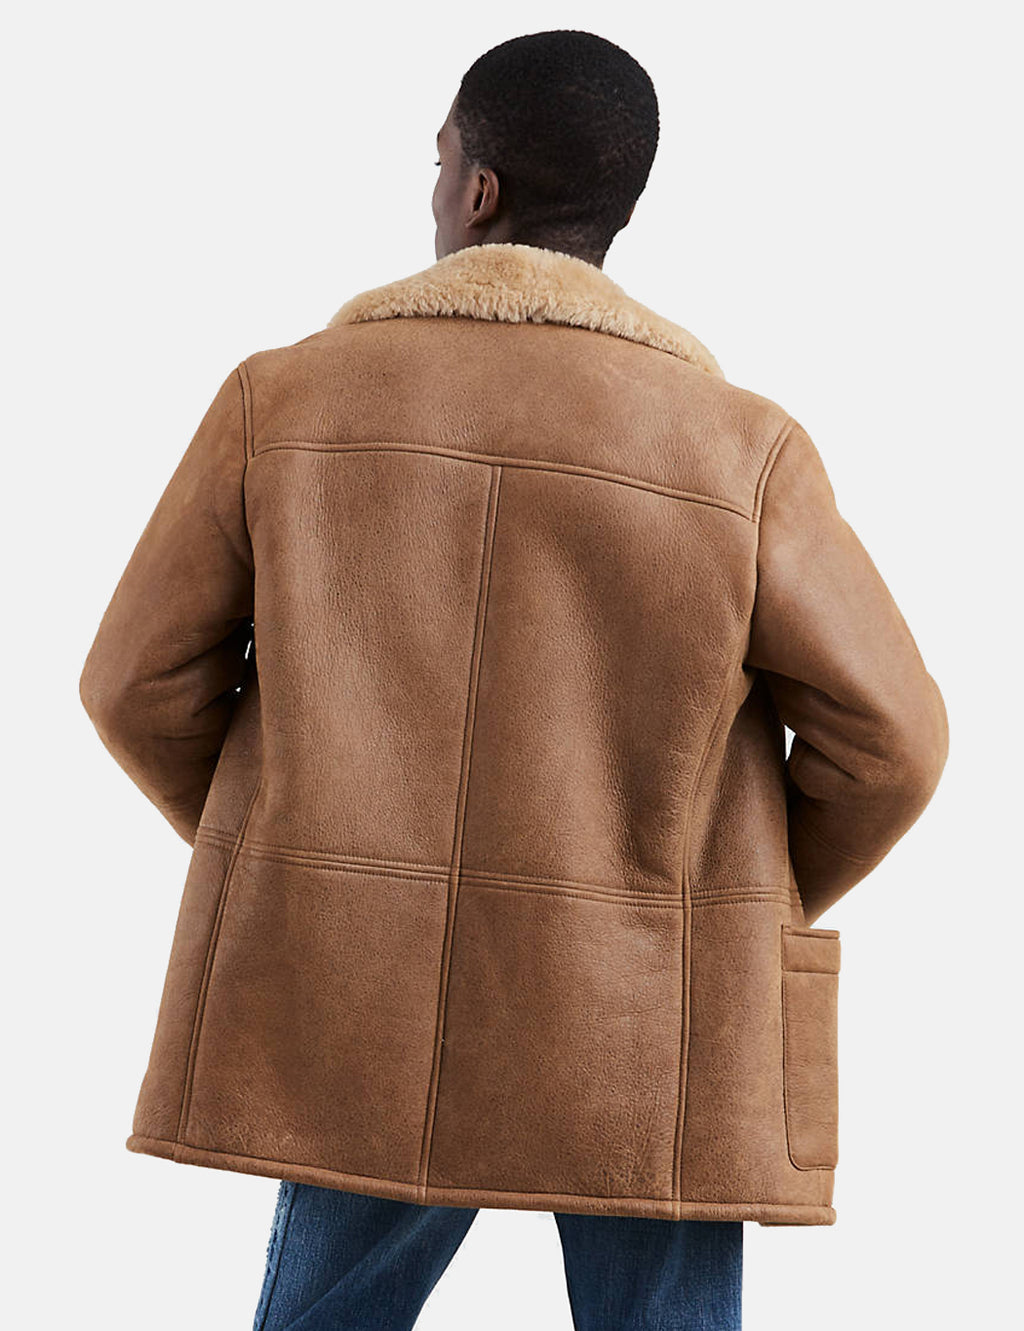 Levis Made & Crafted Shearling Ranch Coat - Bone Brown | URBAN EXCESS.